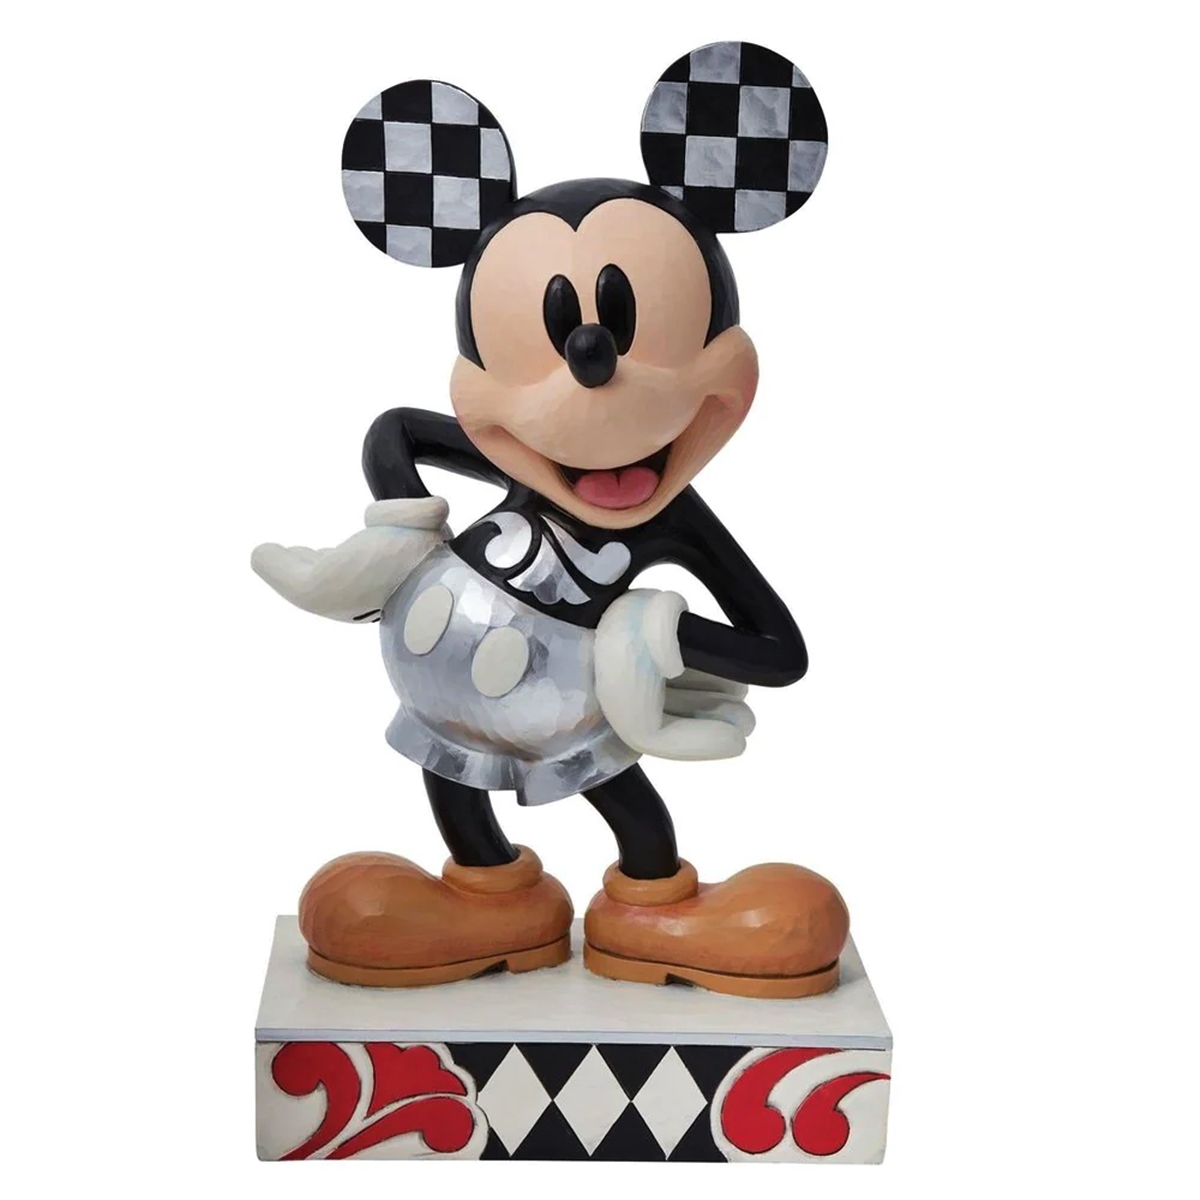 Mickey and Friends Mini Figures 5 Pack - Toy Bundle with 5 Cupcake Topper Figurines Including Mickey, Minnie, and More Plus Mickey Stickers and More